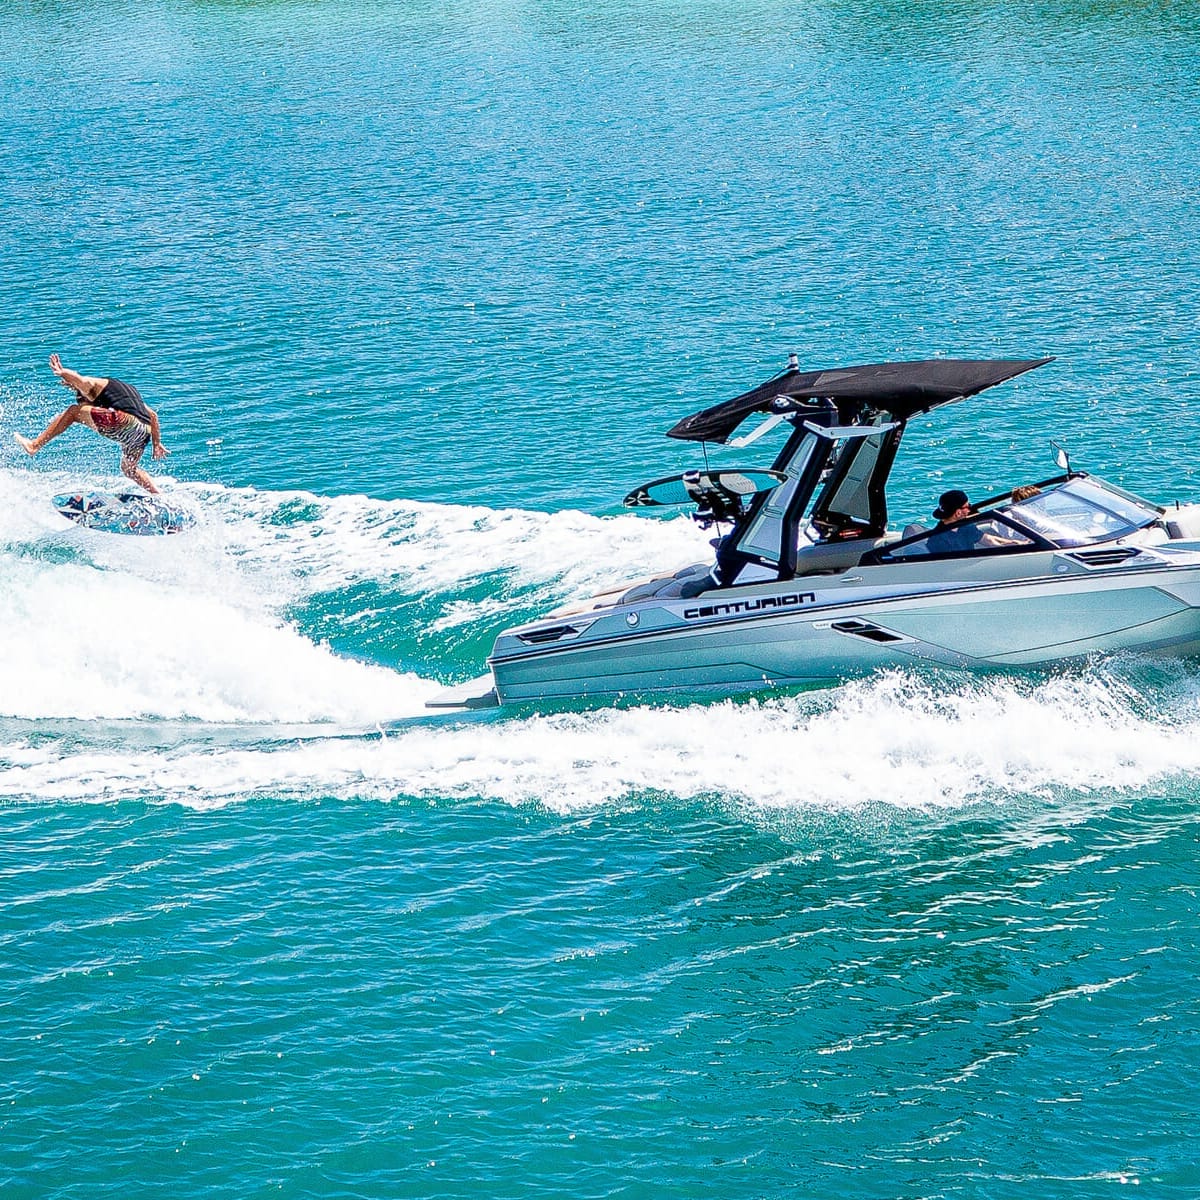 A person is wakesurfing behind a boat.